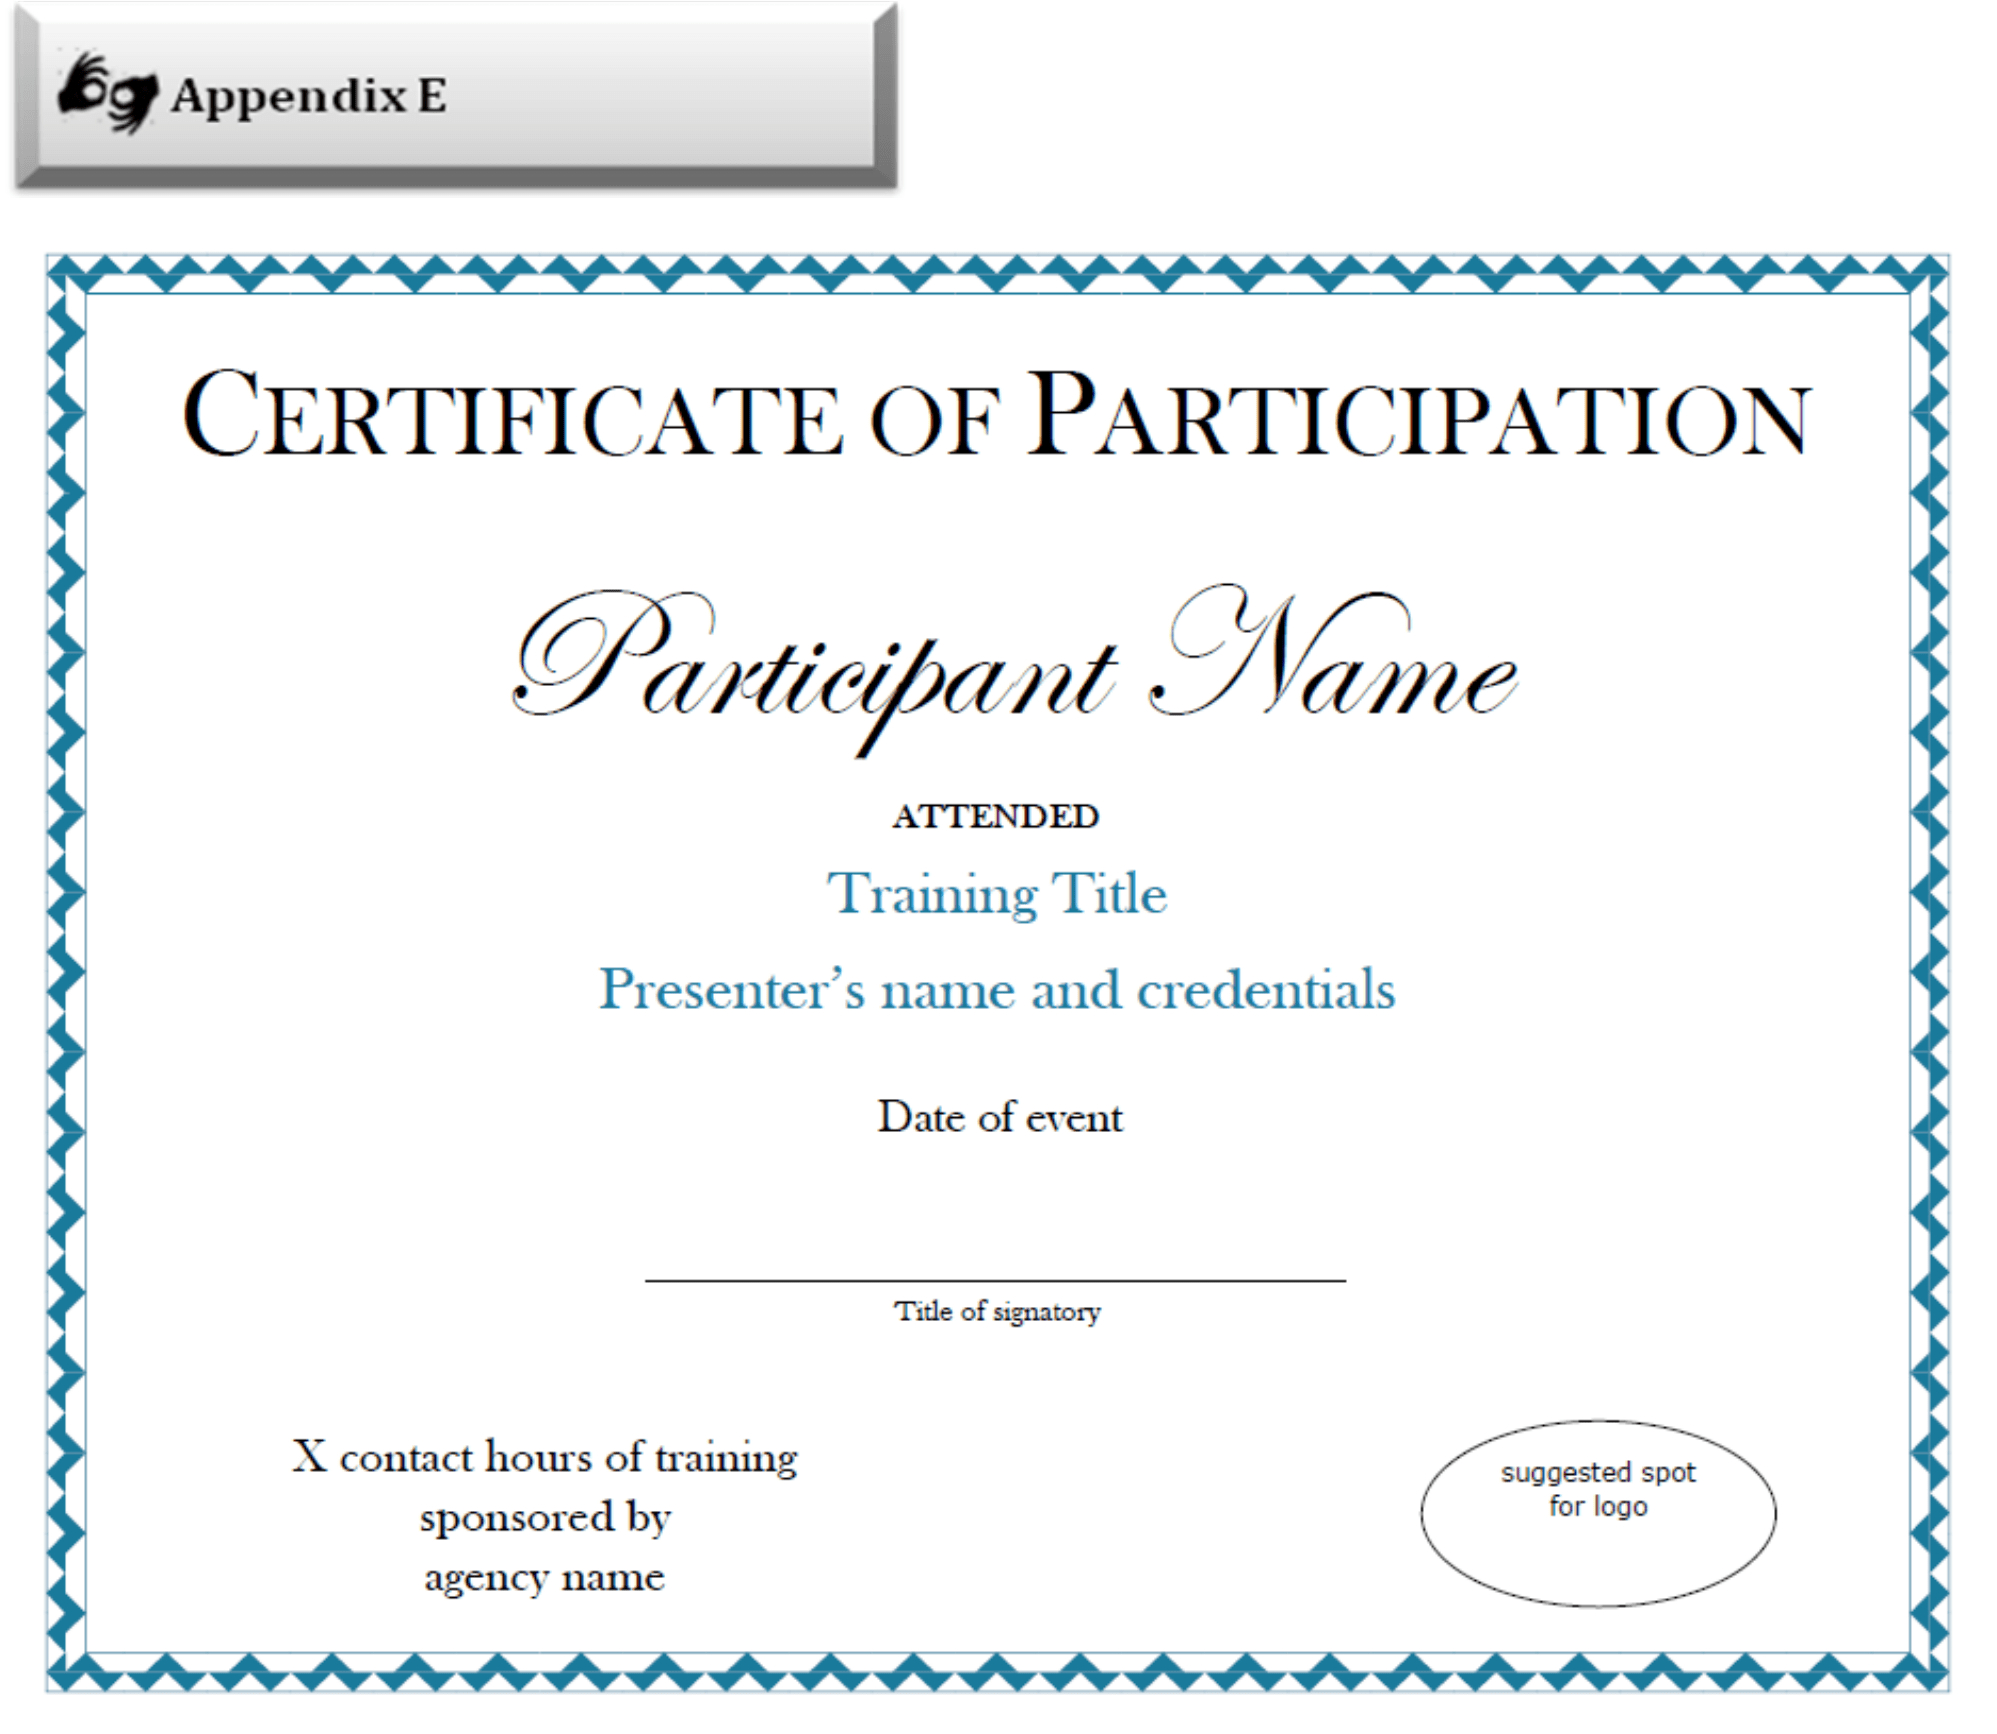 Participation Certificate Template Free Download | Sample Inside Participation Certificate Templates Free Download